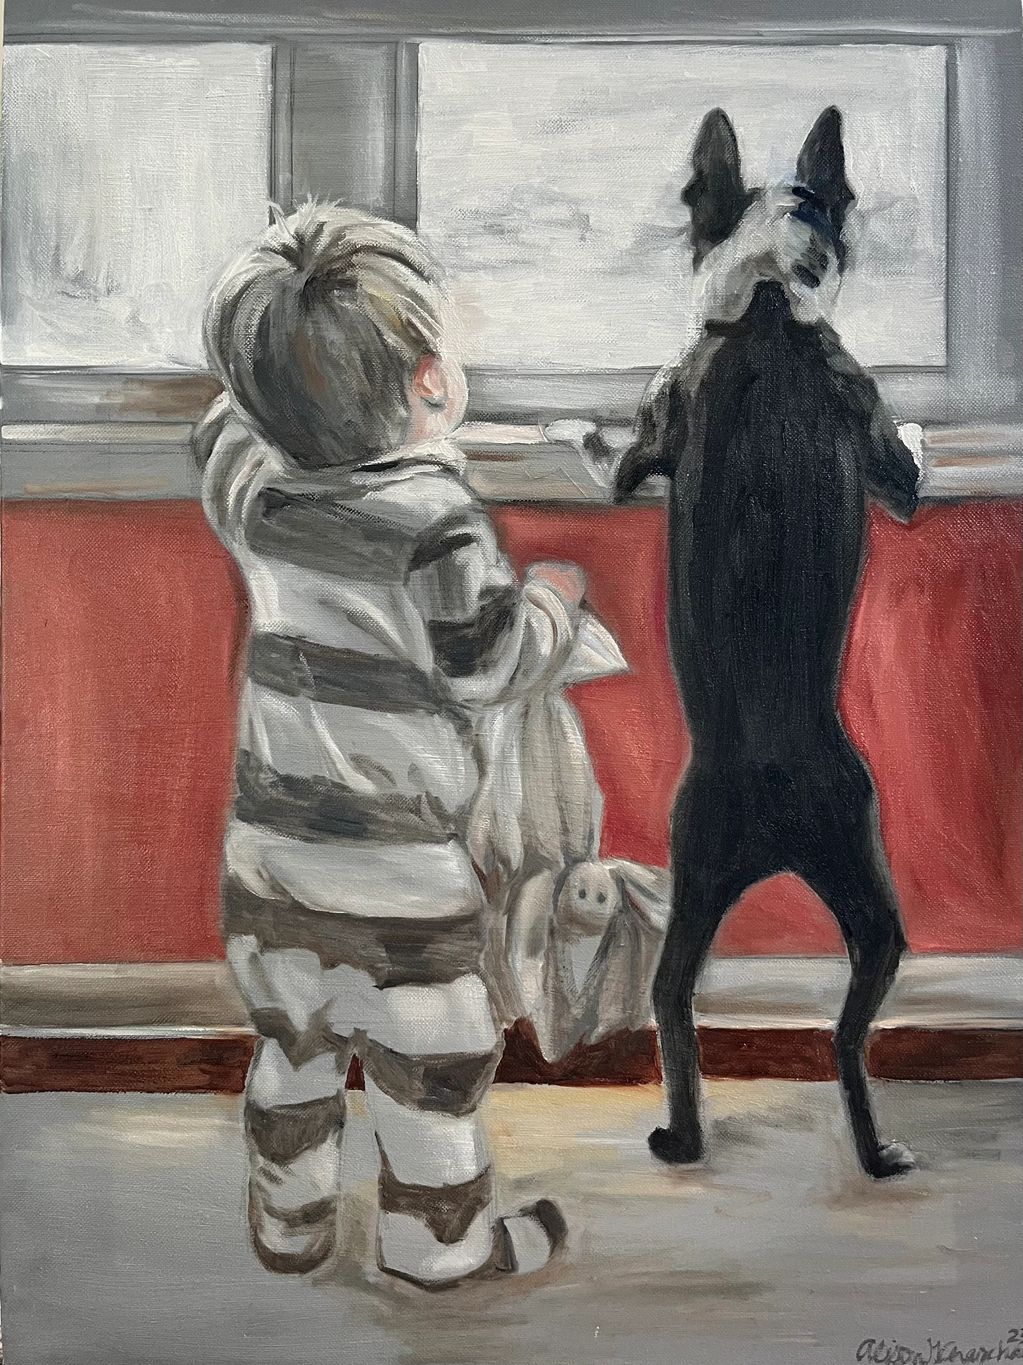 A painting of a baby boy standing next to his dog looking out the window.